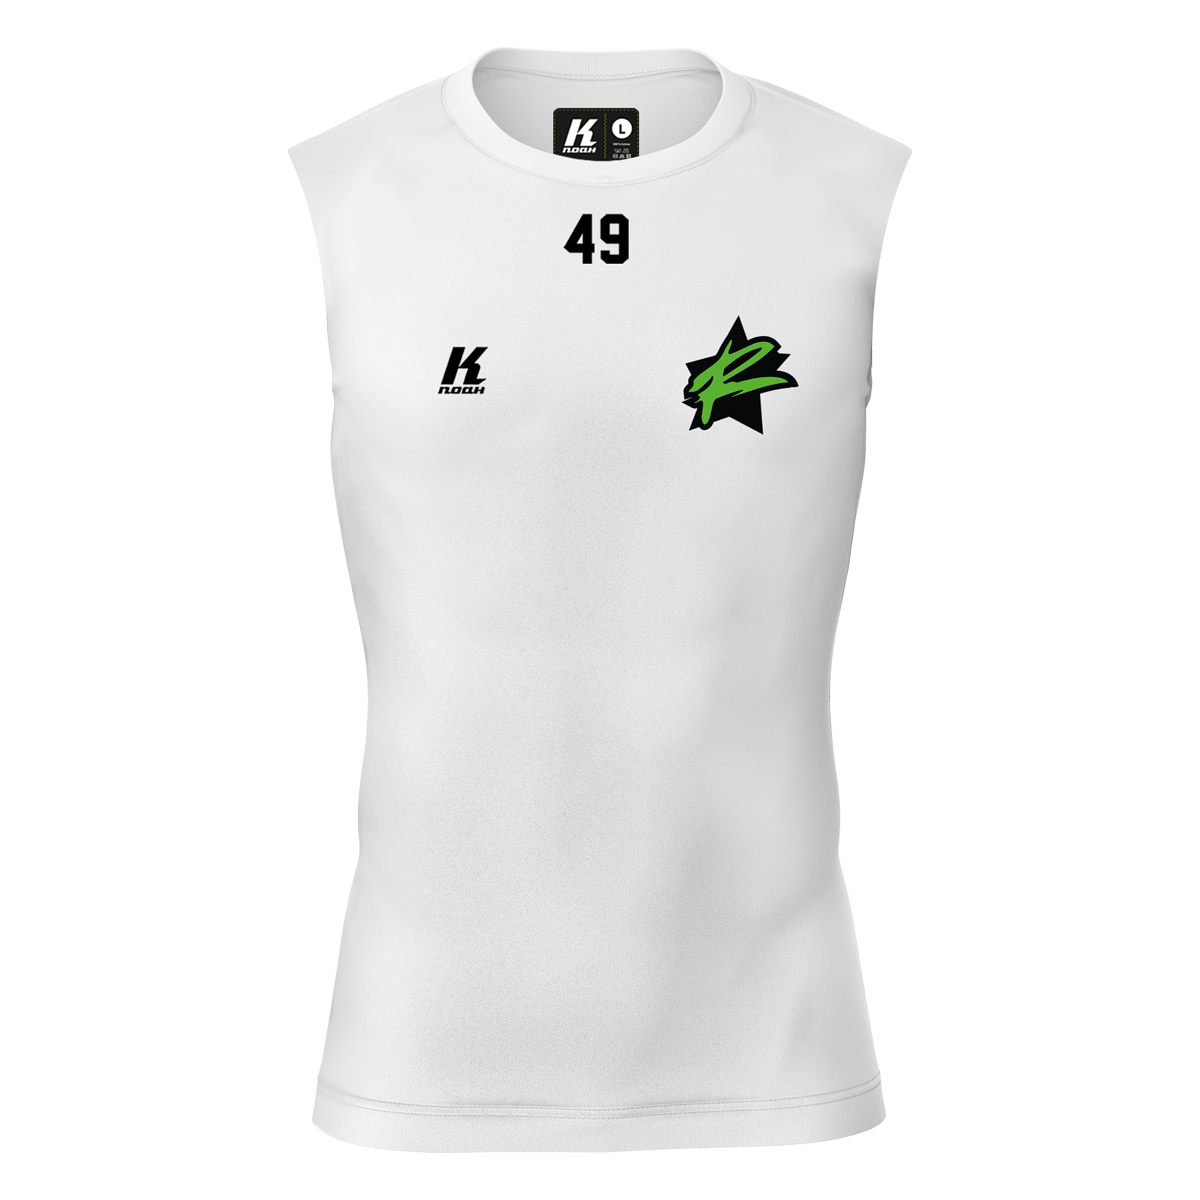 Rebels K.Tech Compression Sleeveless Shirt white with Playernumber/Initials